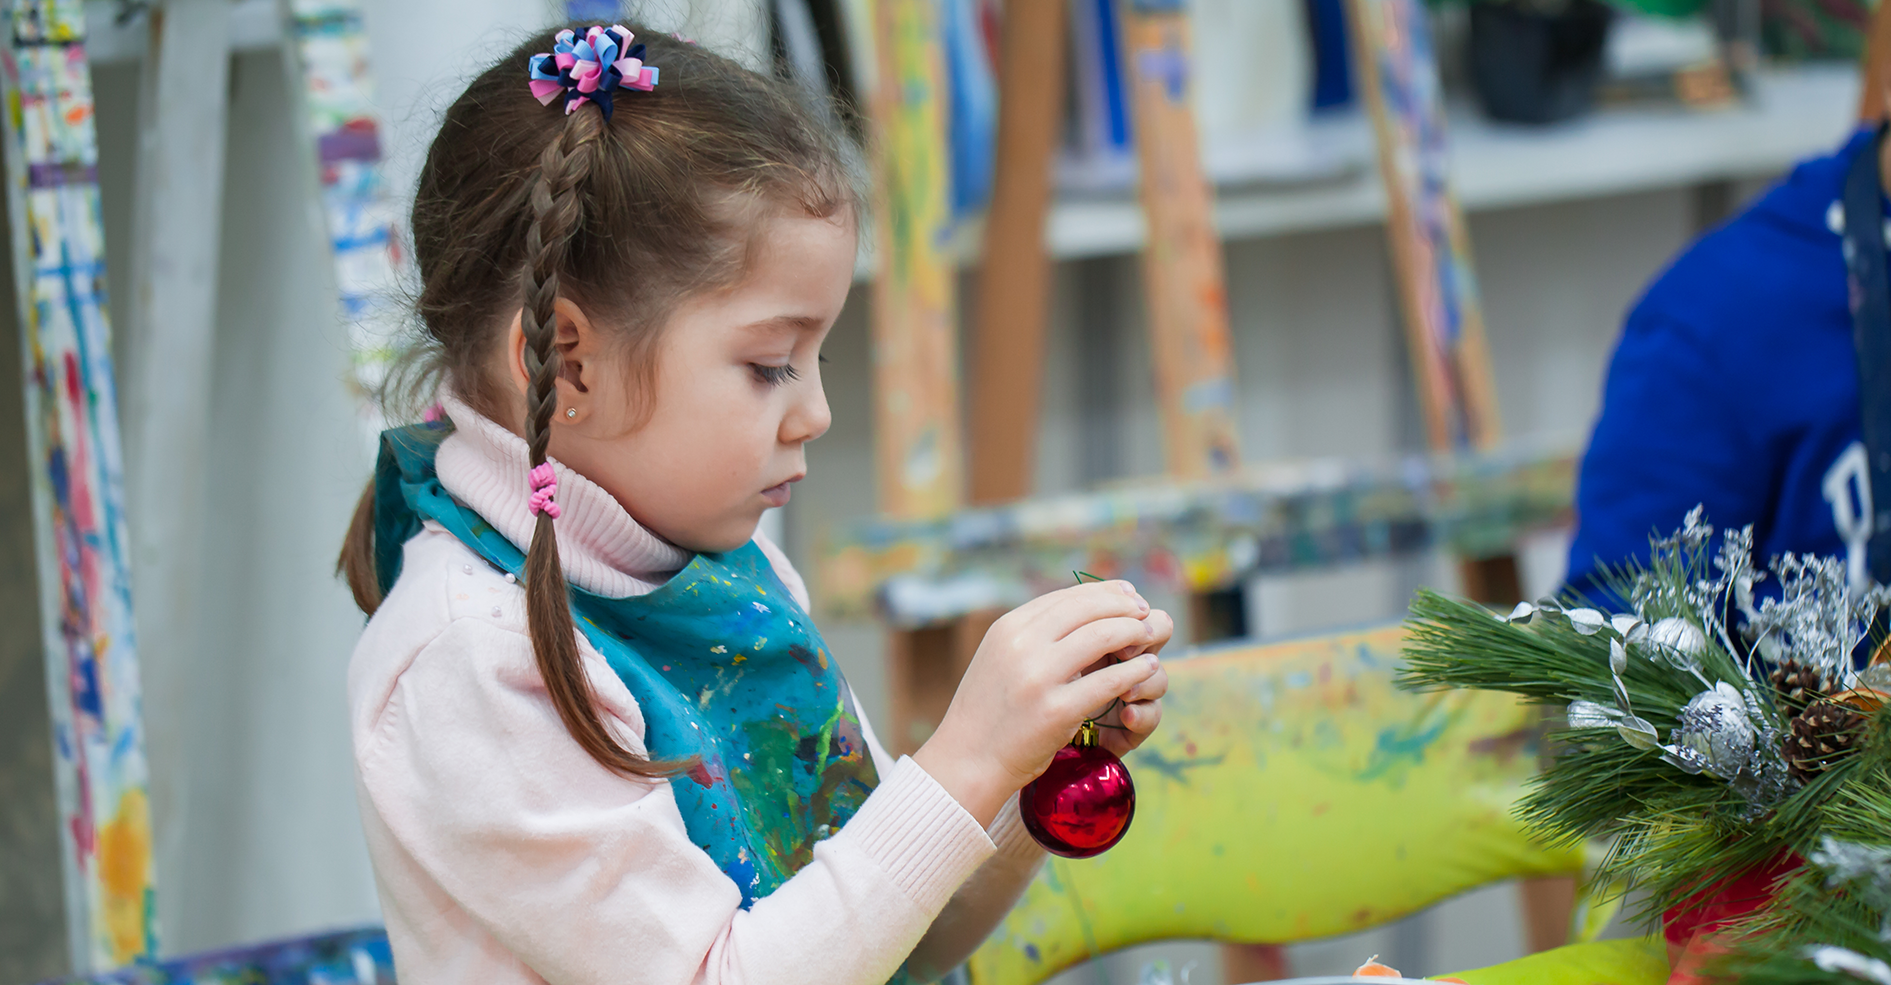 Female child participating in winter holiday crafts